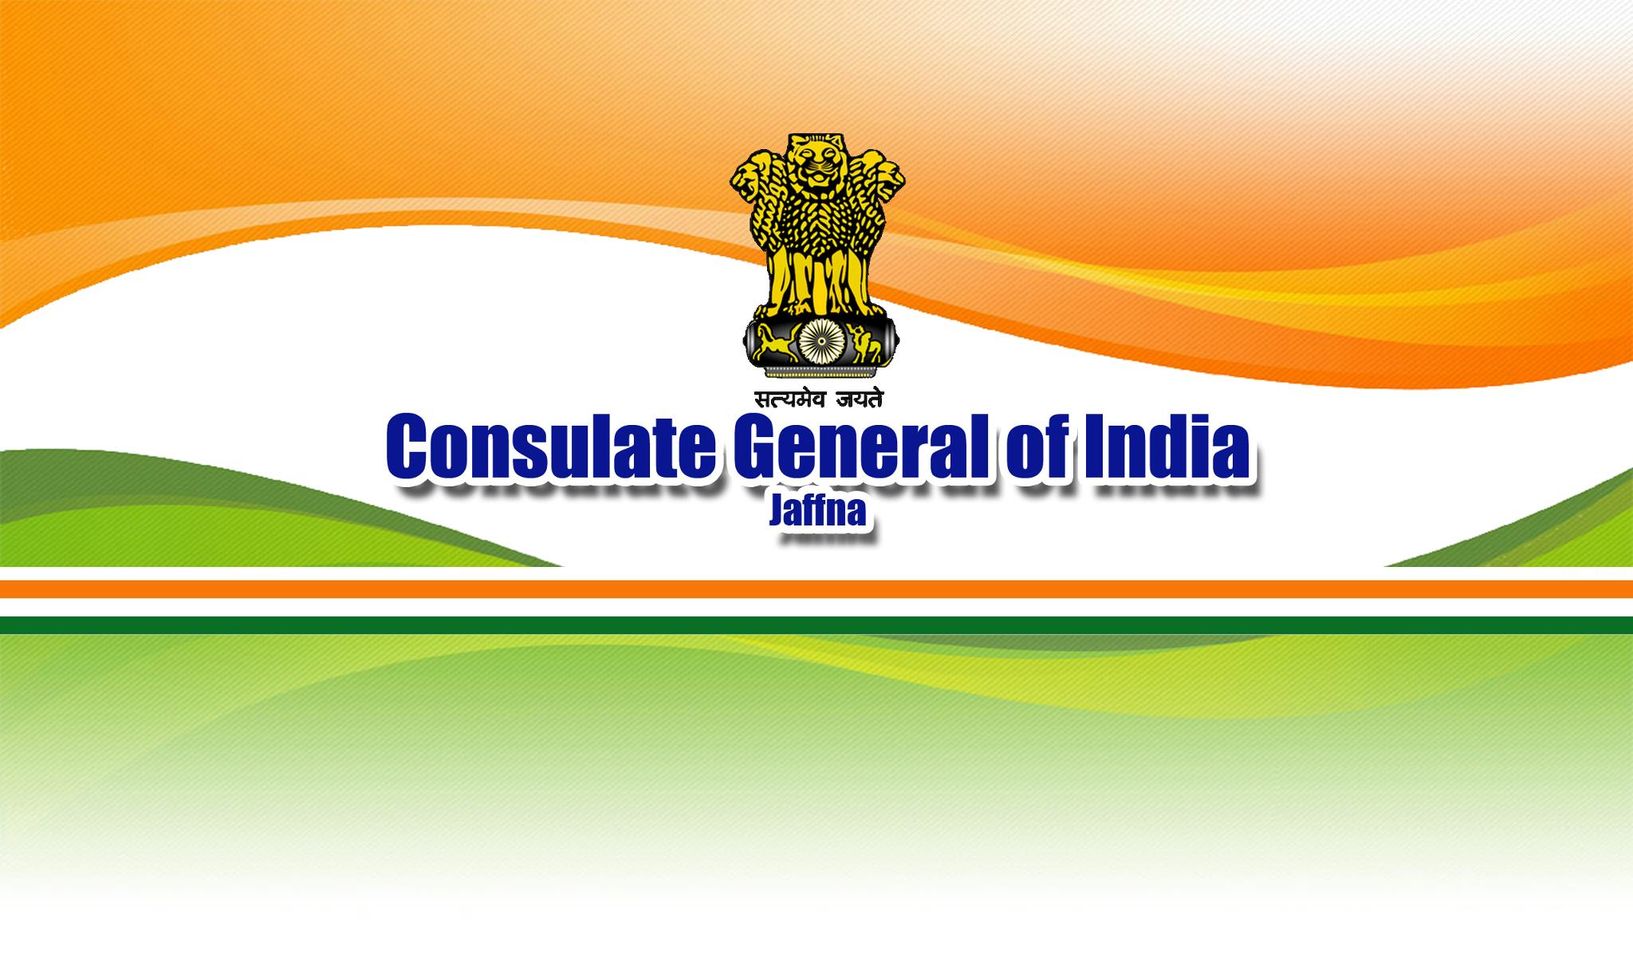 Statement by Spokesperson regarding the participation of Consul General of India in Jaffna at an event